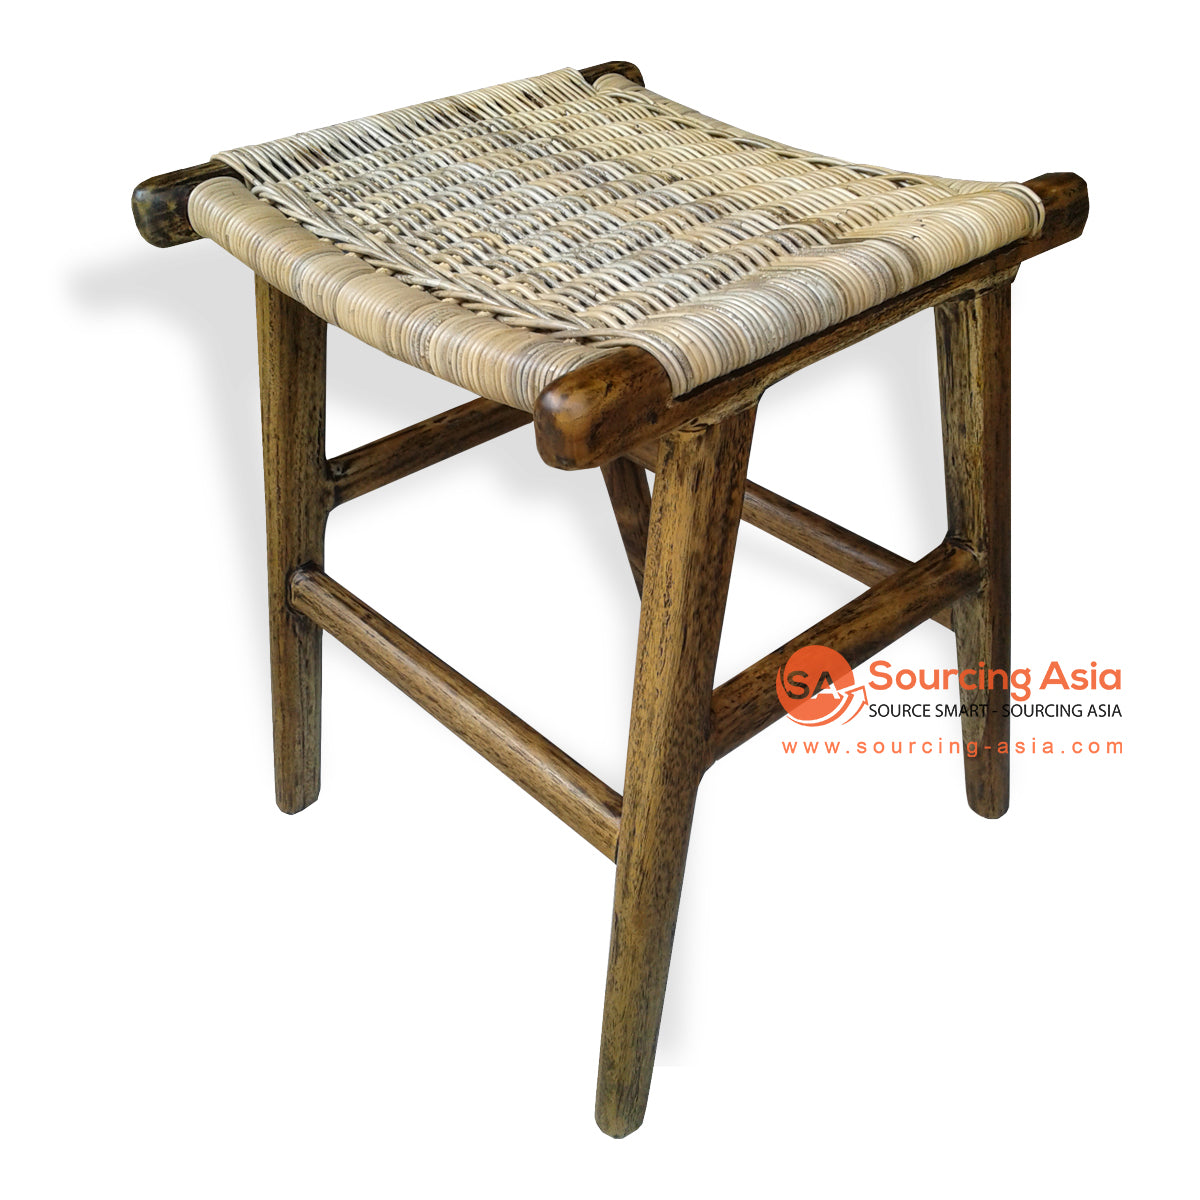 KUSJ057-1 ANTIQUE TEAK WOOD AND SYNTHETIC WOVEN RATTAN SQUARE JERRY BAR STOOL